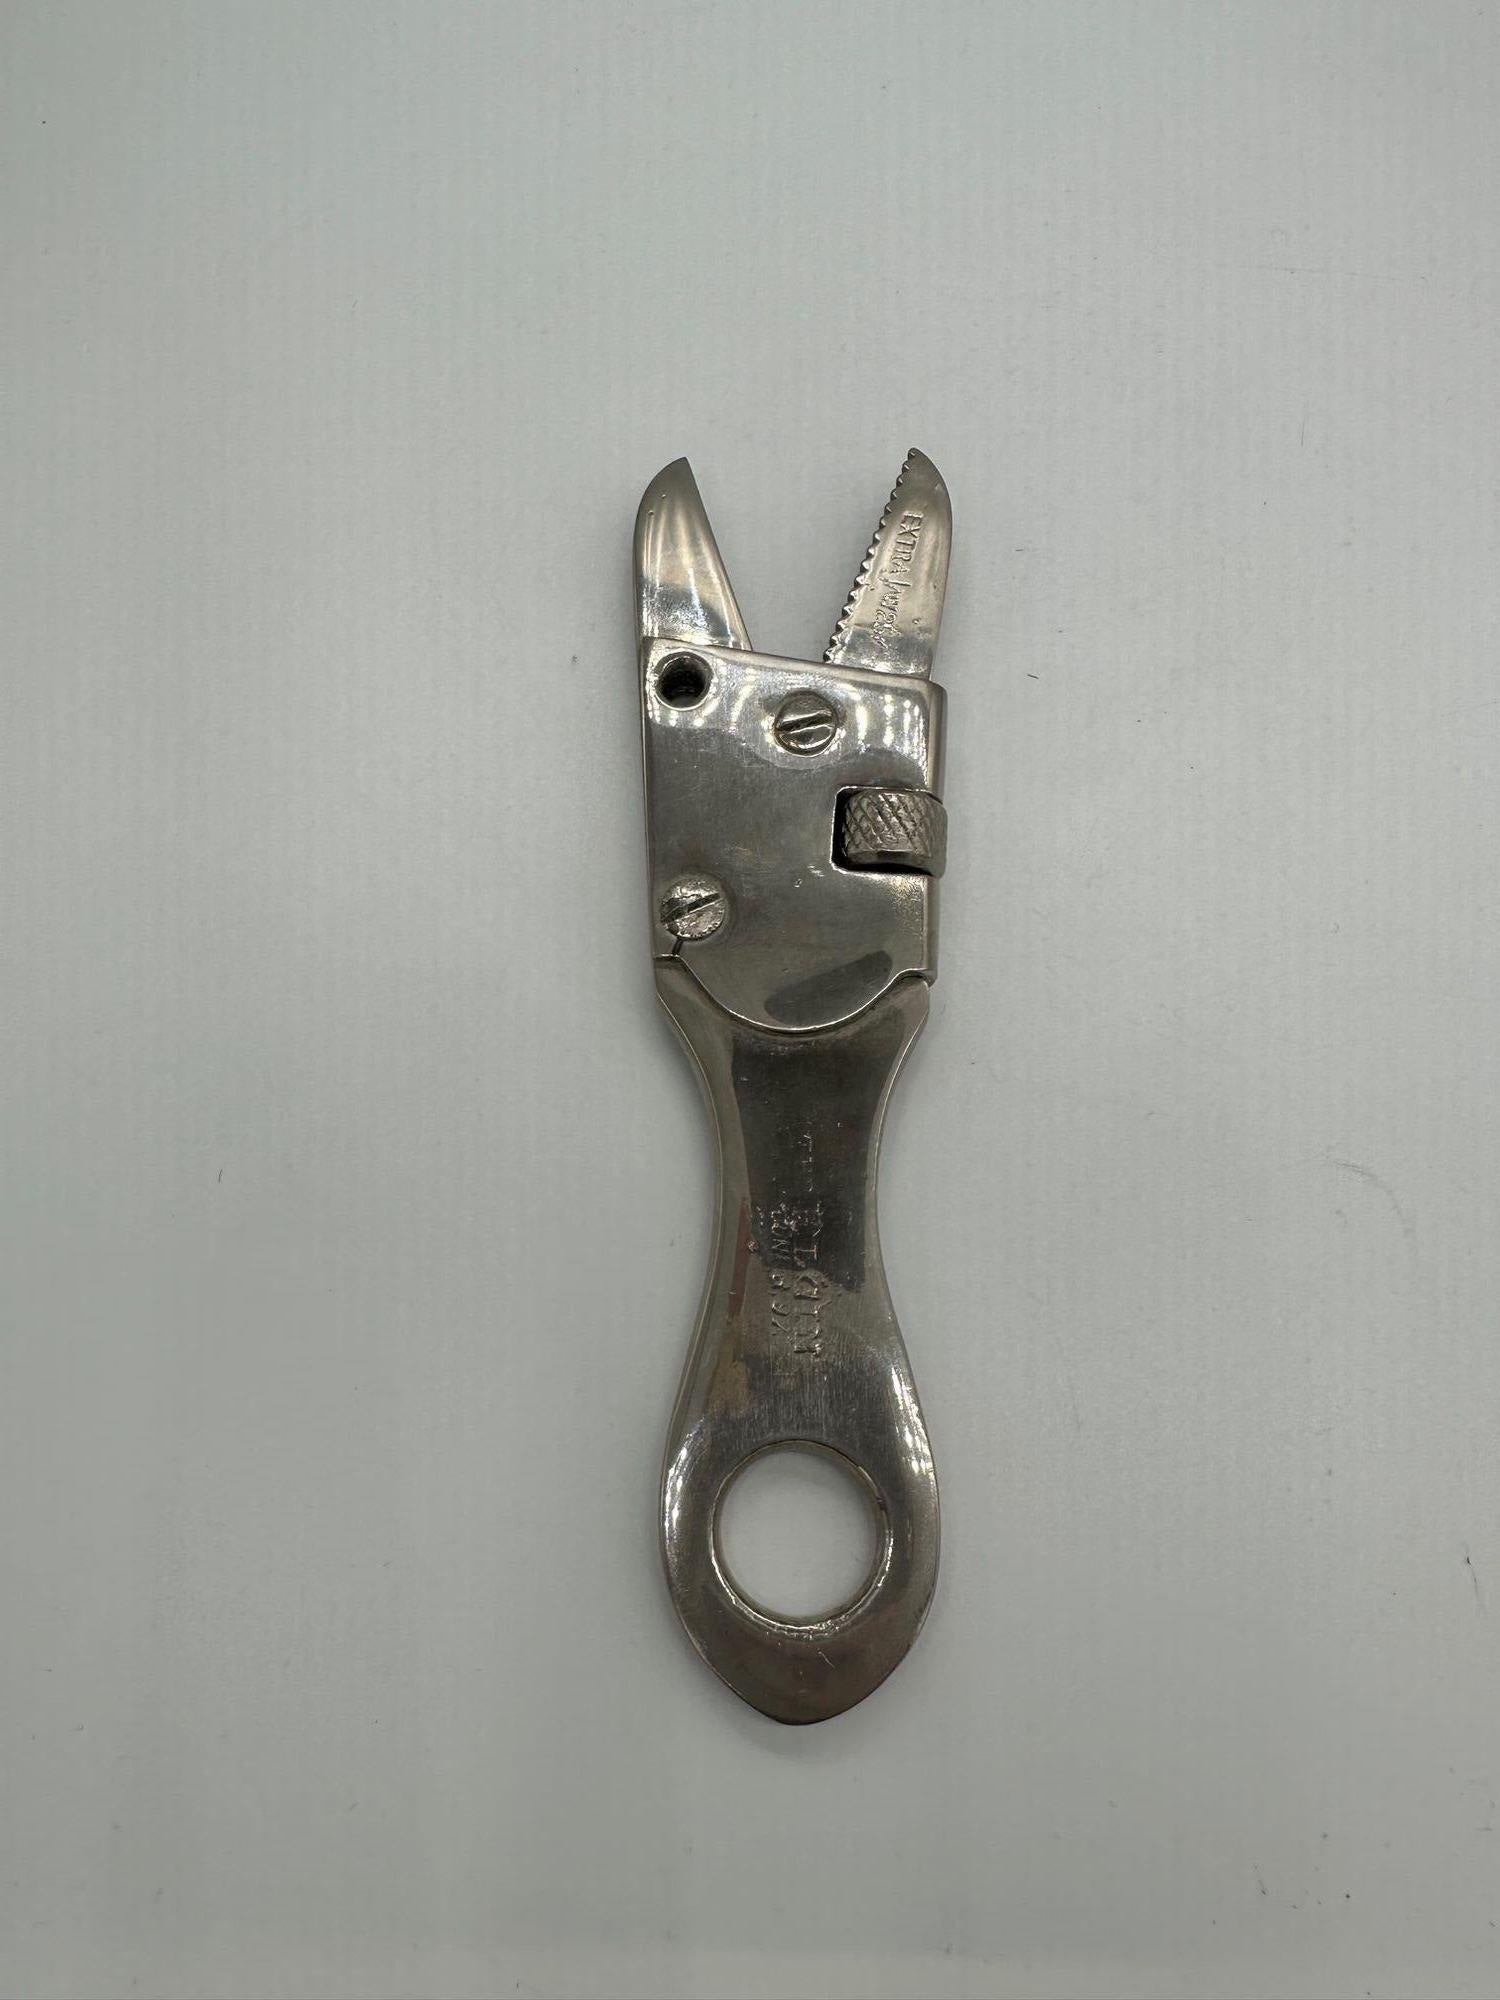 This antique adjustable wrench from The Elgin, dubbed 